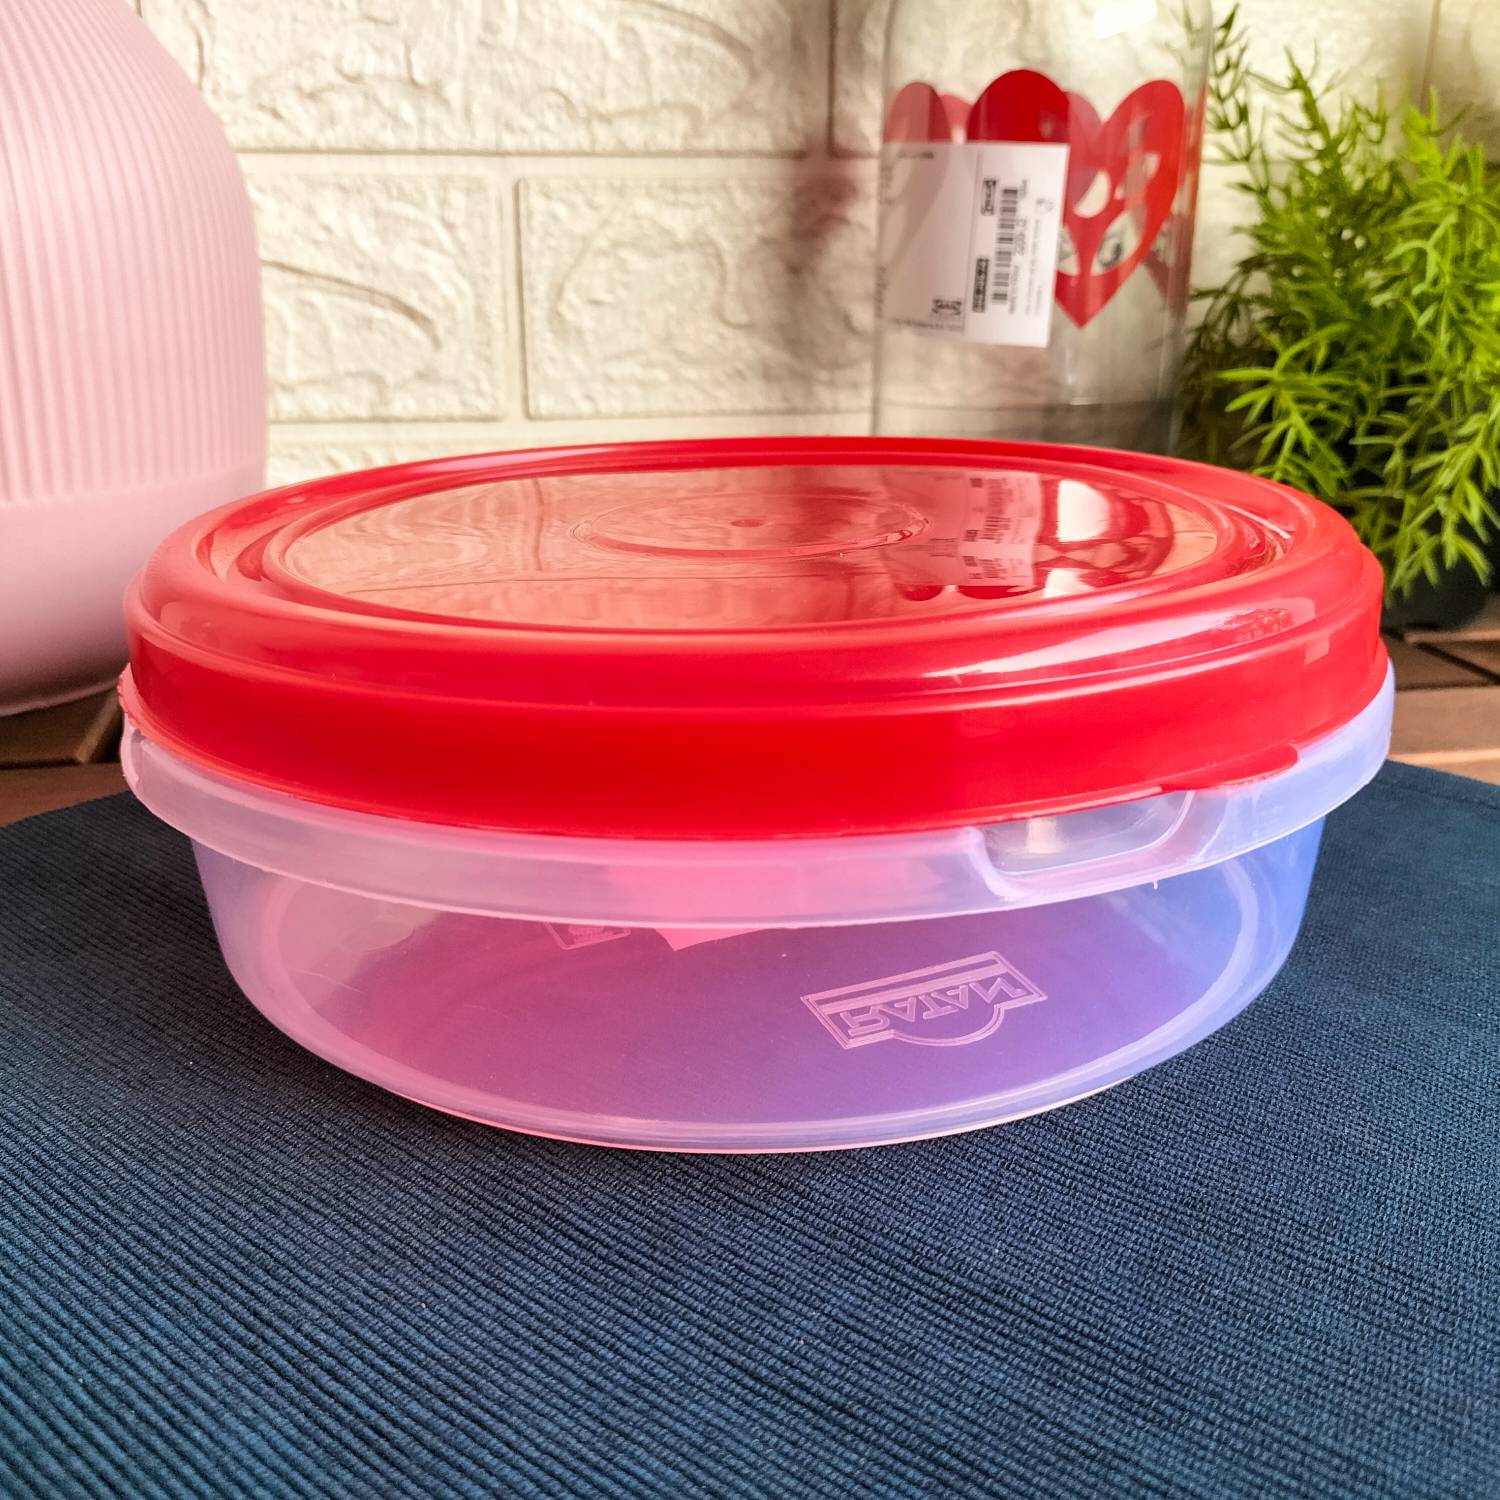 Saphire Food Container - 1.5 L